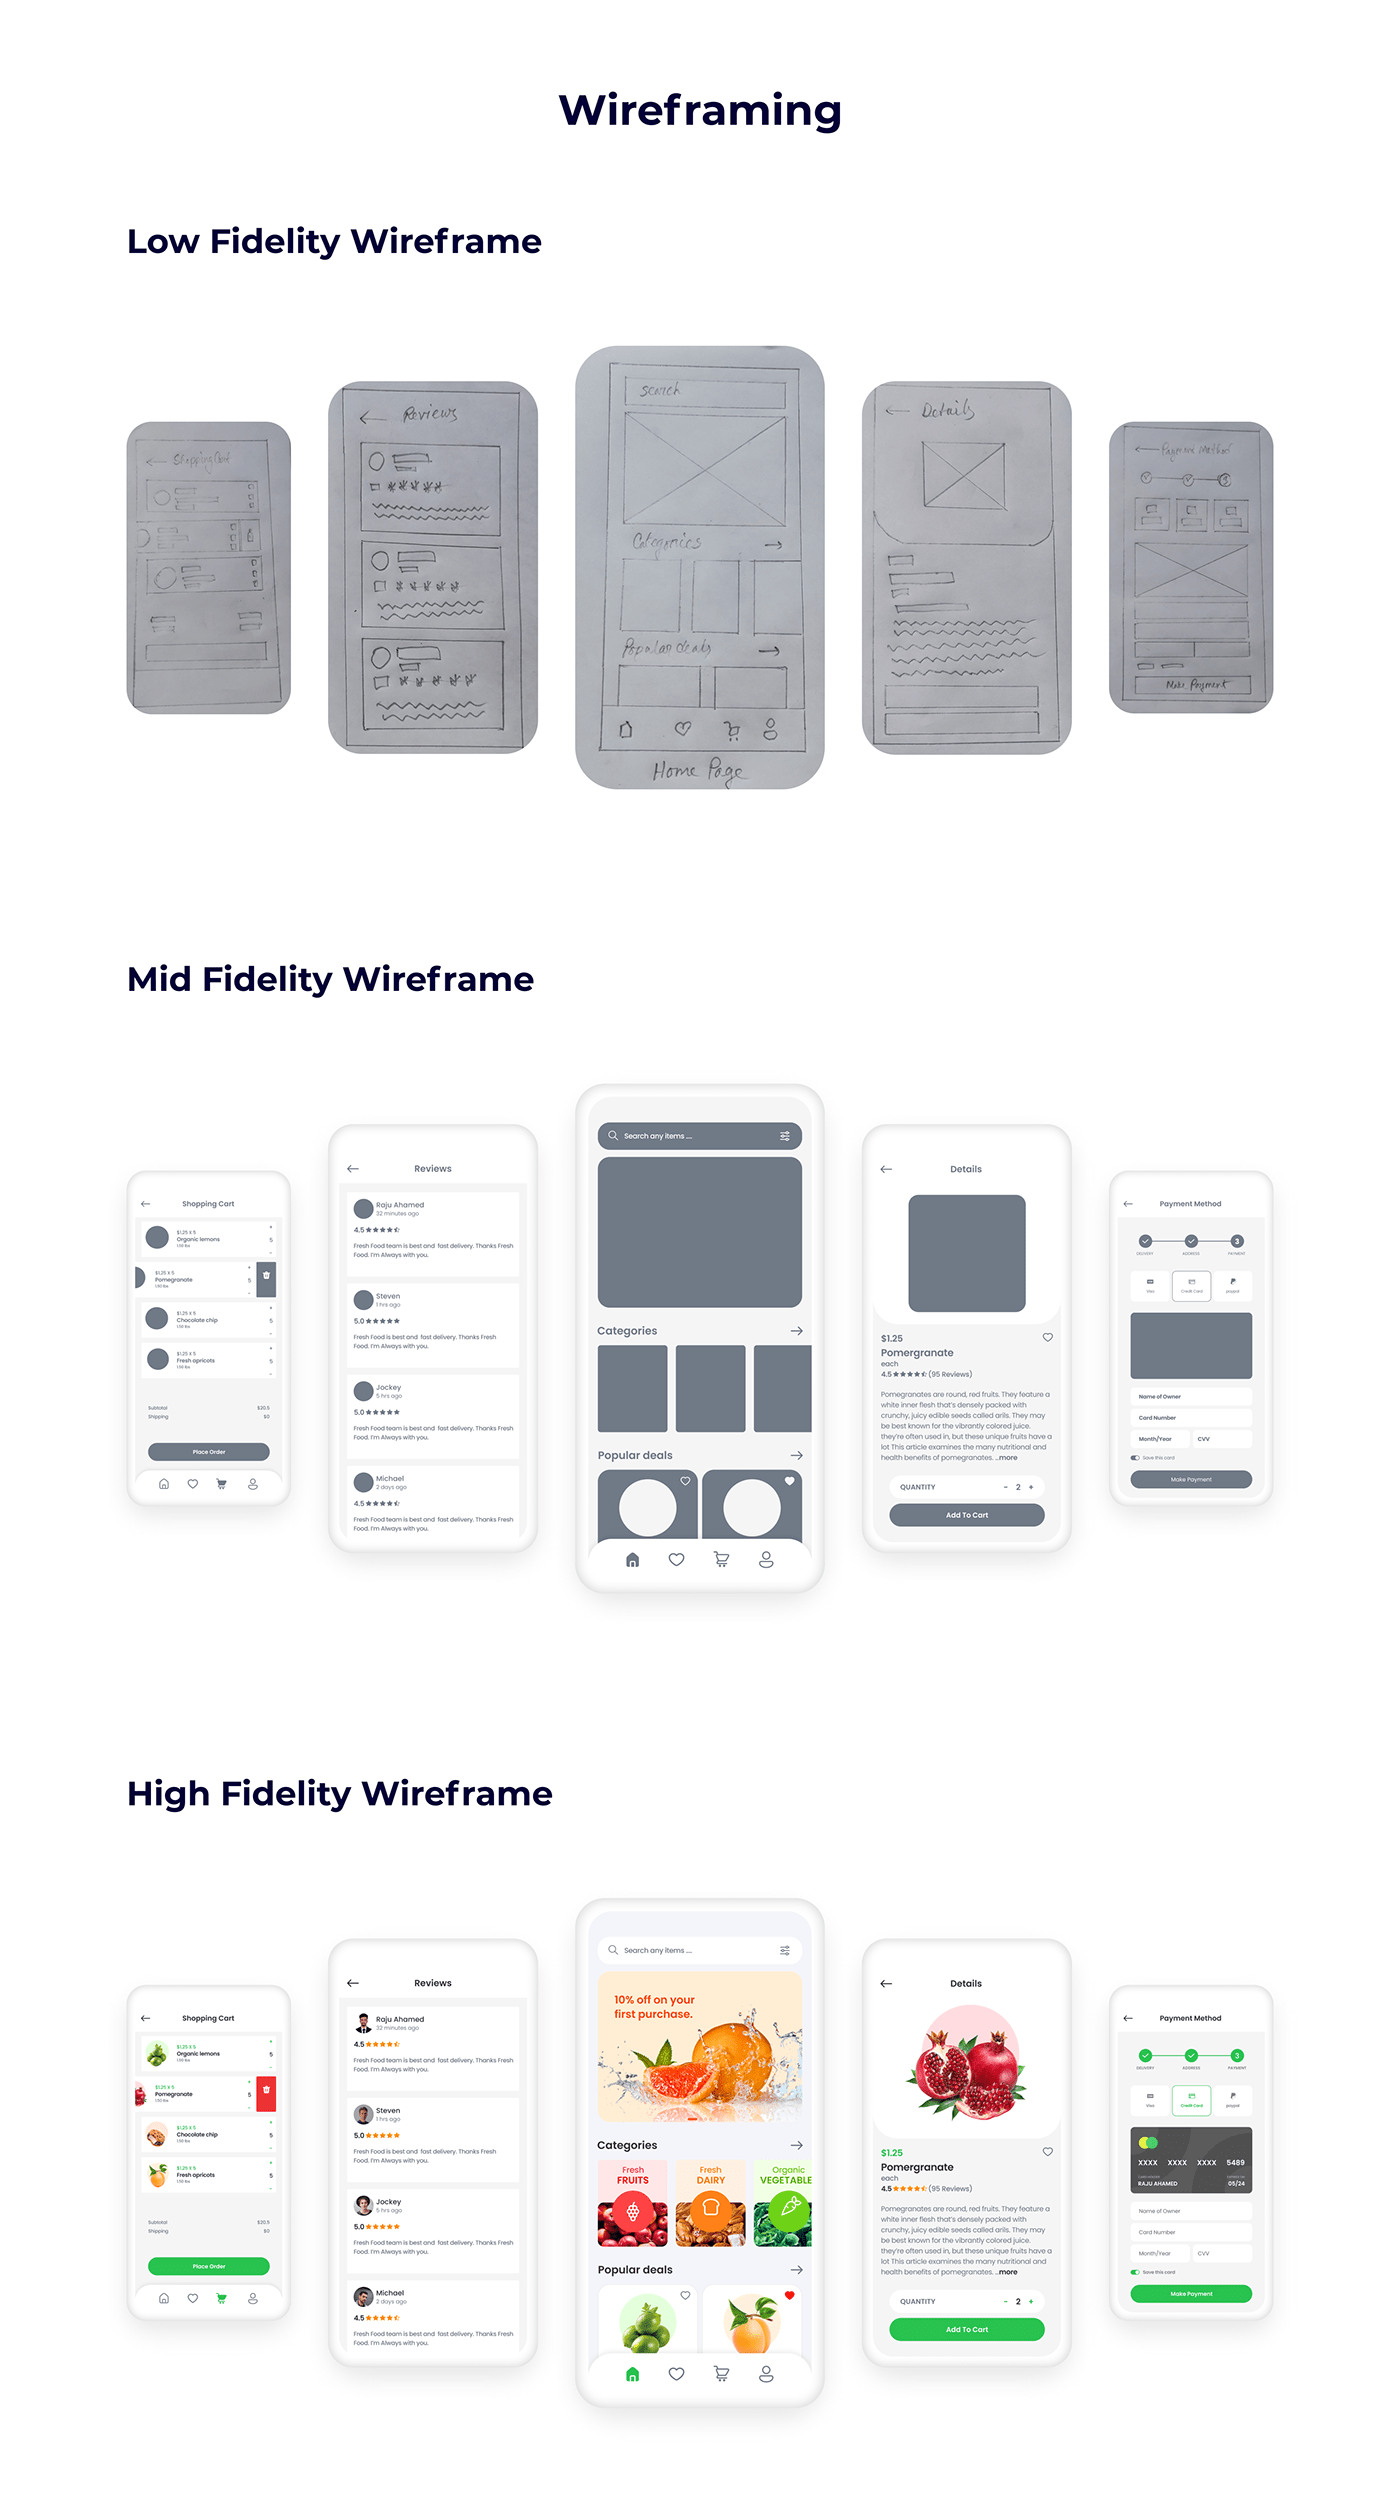 Case Study Ecommerce ecommerce app food delivery Grocery Grocery App Mobile app UI UI/UX ux